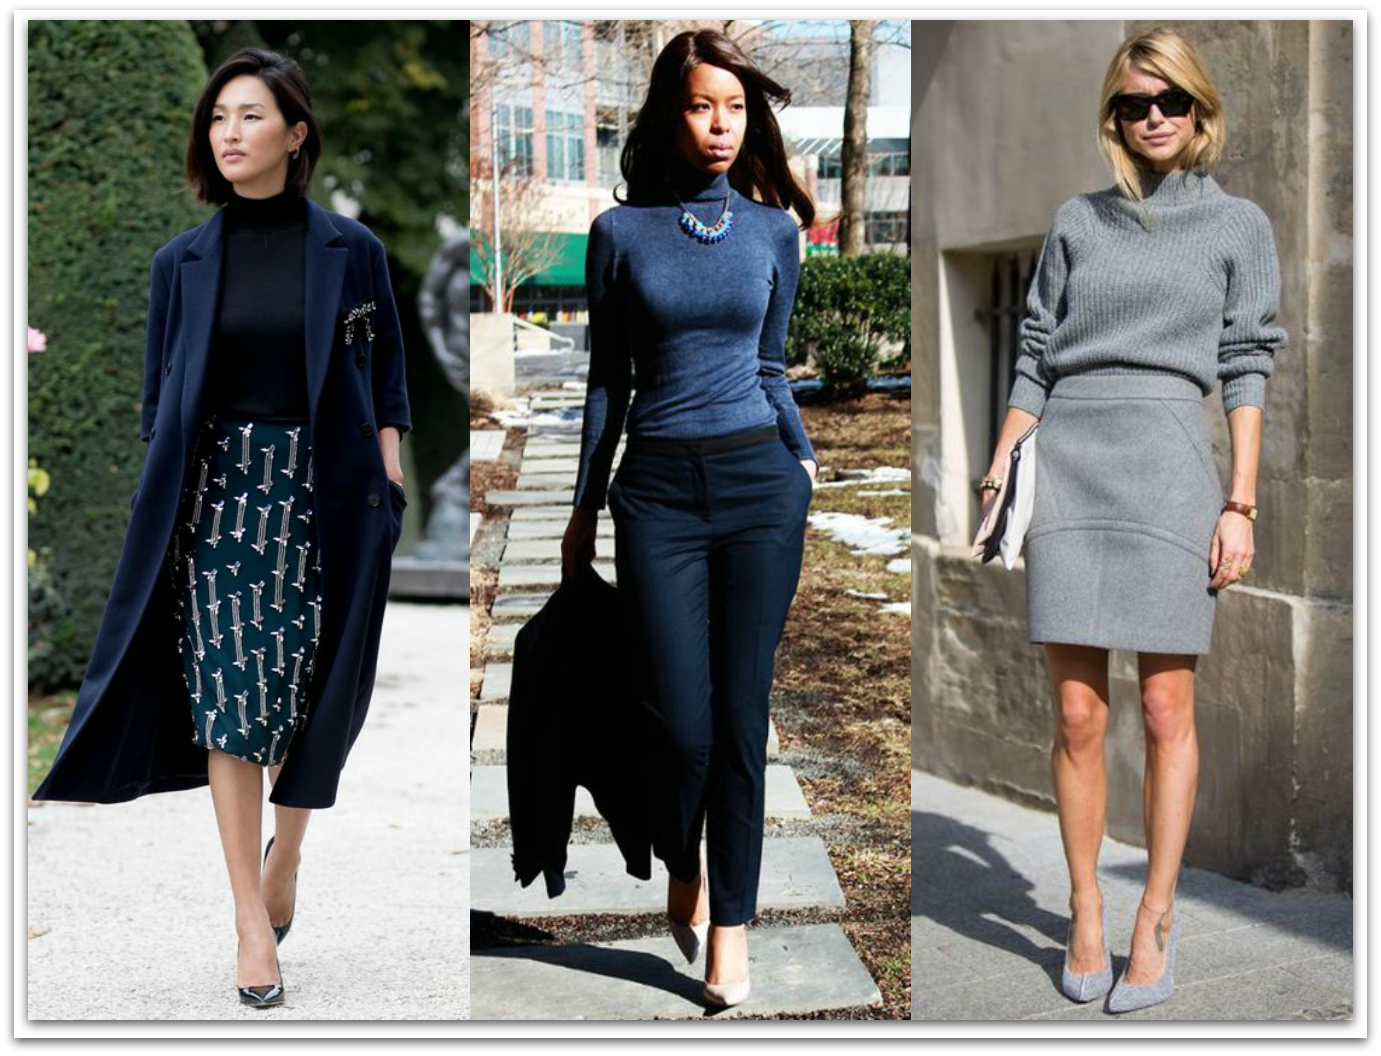 HOW TO WORK THE TURTLENECK TREND - Style Clinic